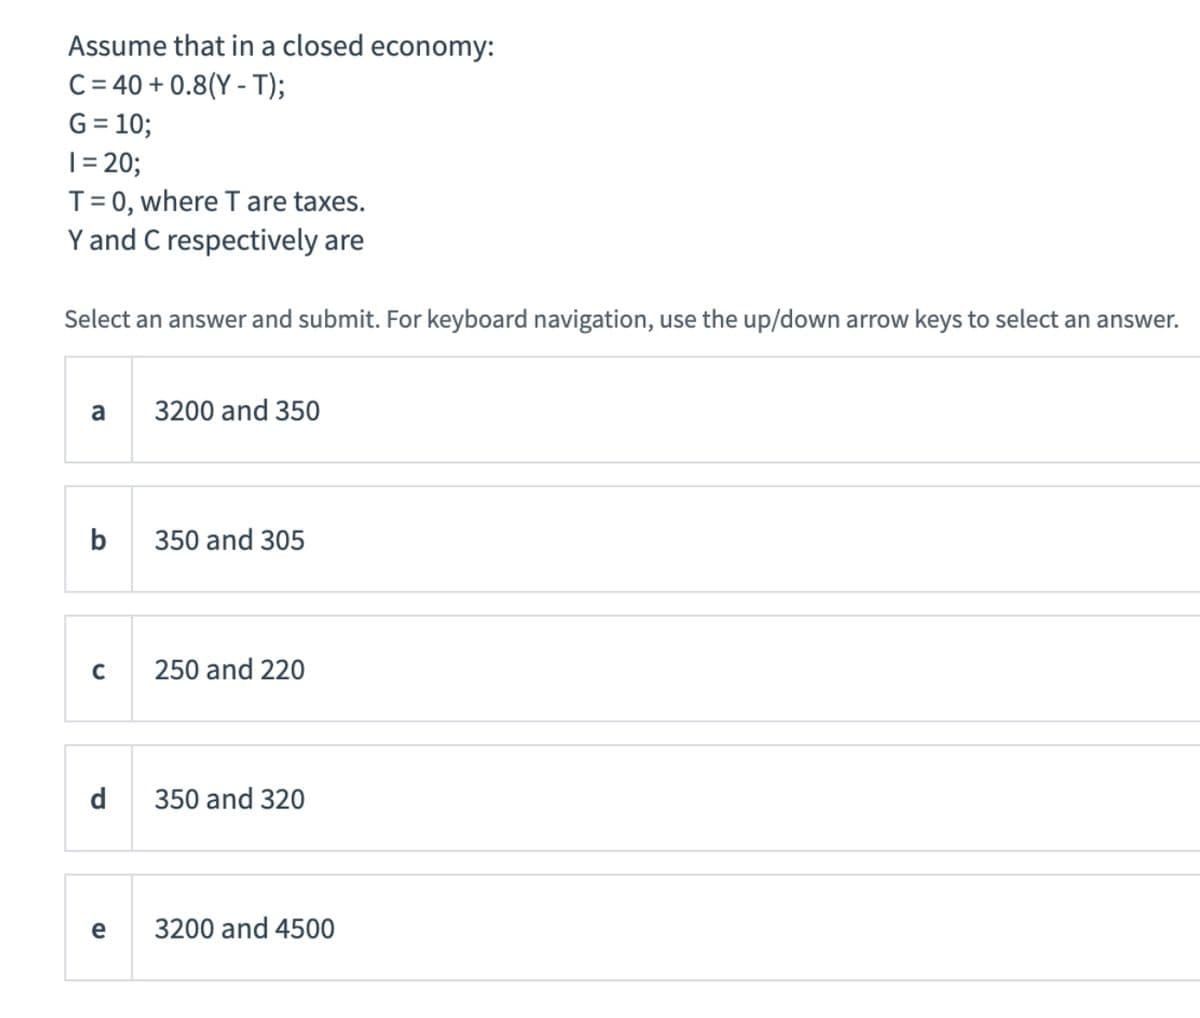 Assume that in a closed economy:
C = 40 + 0.8(Y - T);
G = 10;
|= 20;
T= 0, where T are taxes.
Y and C respectively are
Select an answer and submit. For keyboard navigation, use the up/down arrow keys to select an answer.
a
3200 and 350
b
350 and 305
250 and 220
d
350 and 320
3200 and 4500
